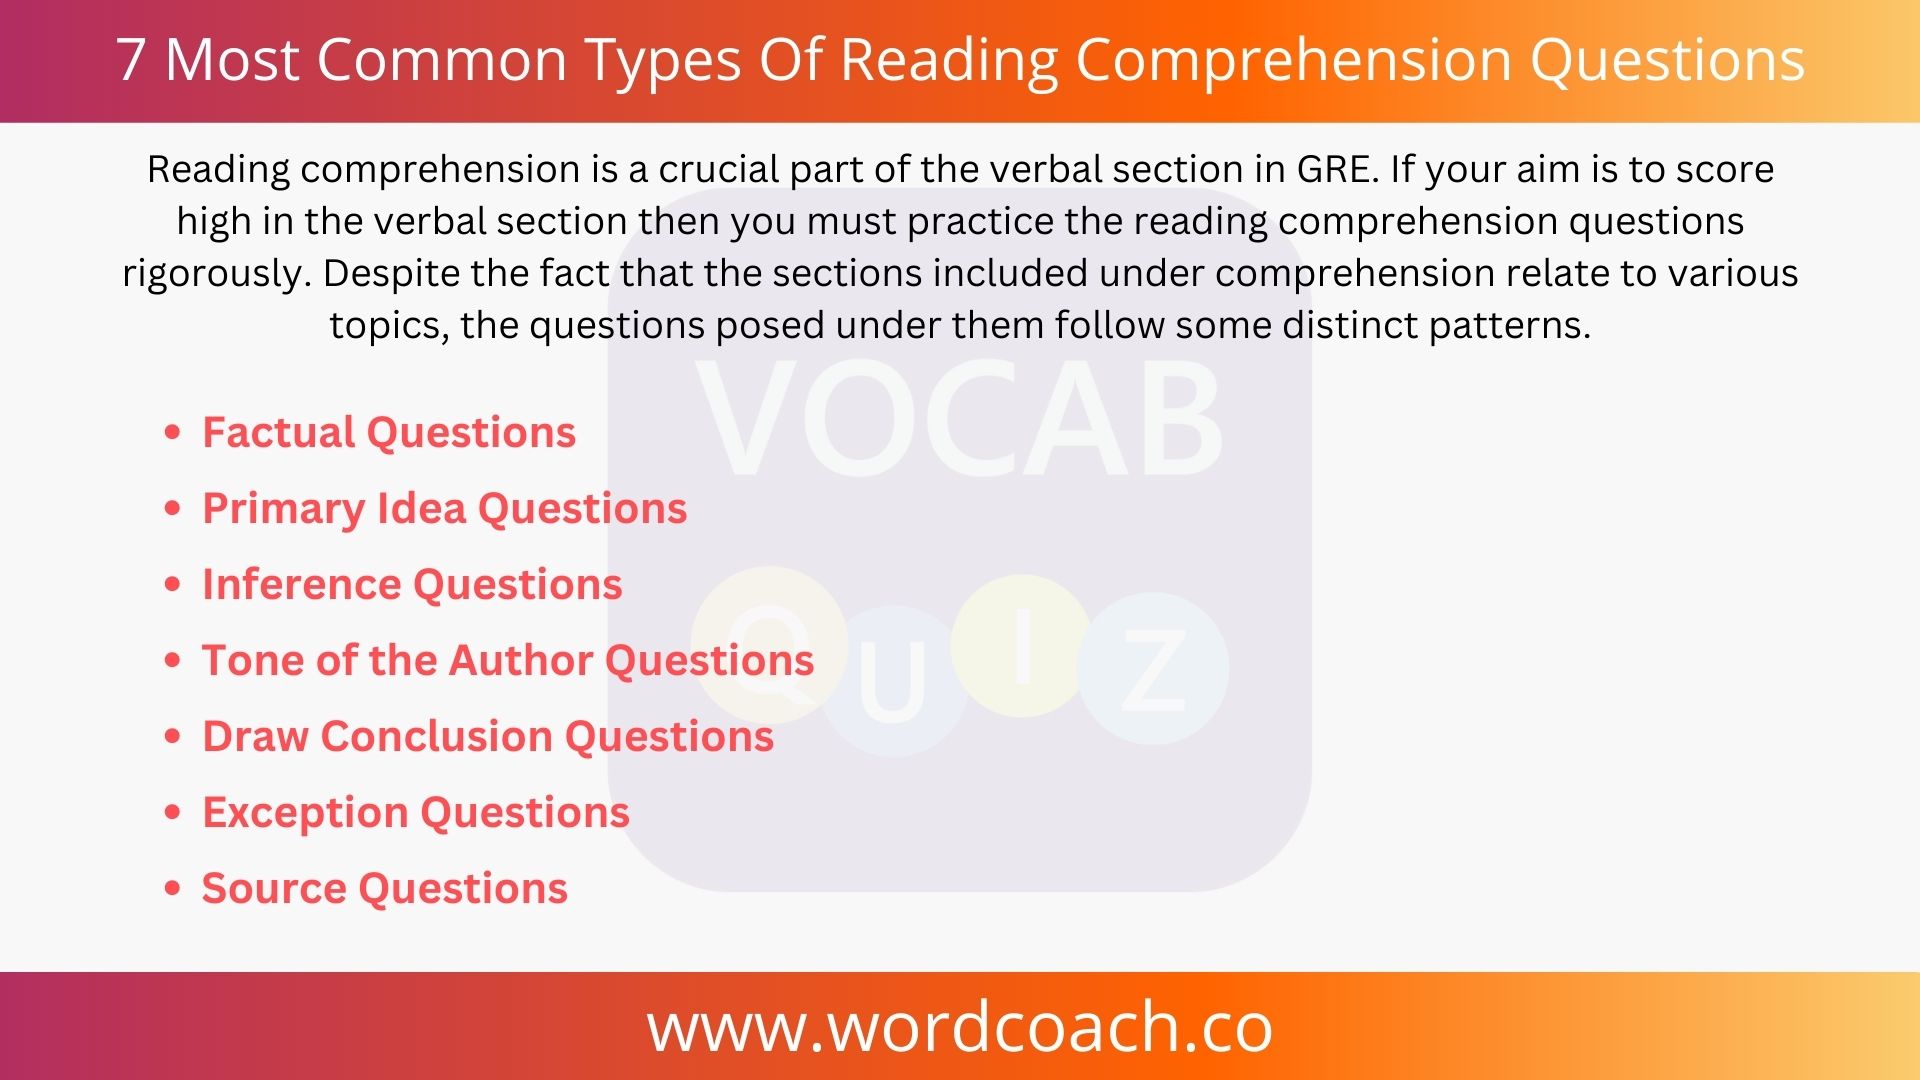 7 Most Common Types Of Reading Comprehension Questions